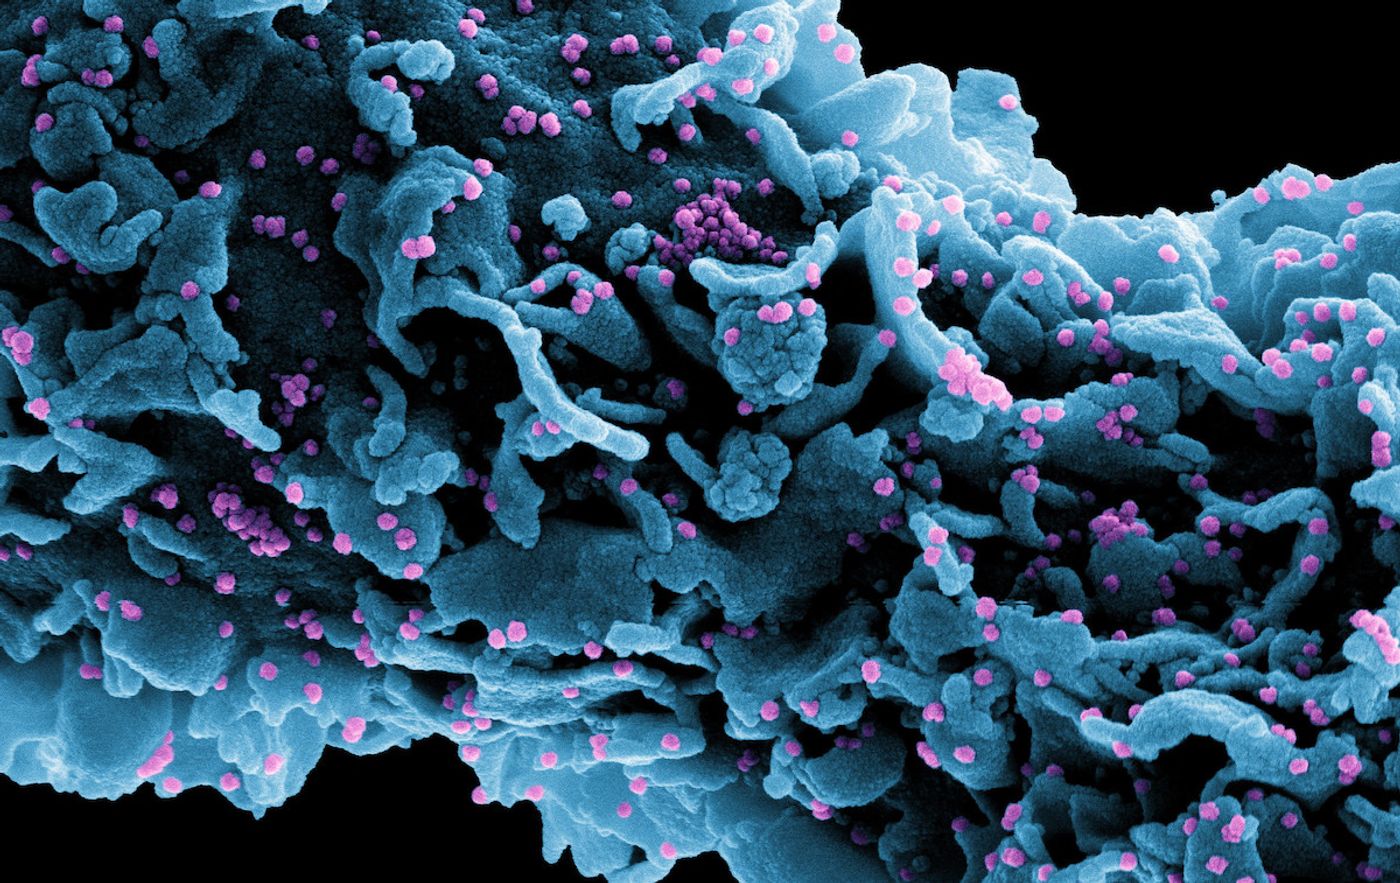 Cropped from a colorized scanning electron micrograph of a cell (blue) infected with a variant strain of SARS-CoV-2 virus particles (UK B.1.1.7; purple), isolated from a patient sample. Image captured at the NIAID Integrated Research Facility (IRF) in Fort Detrick, Maryland. / Credit: NIAID